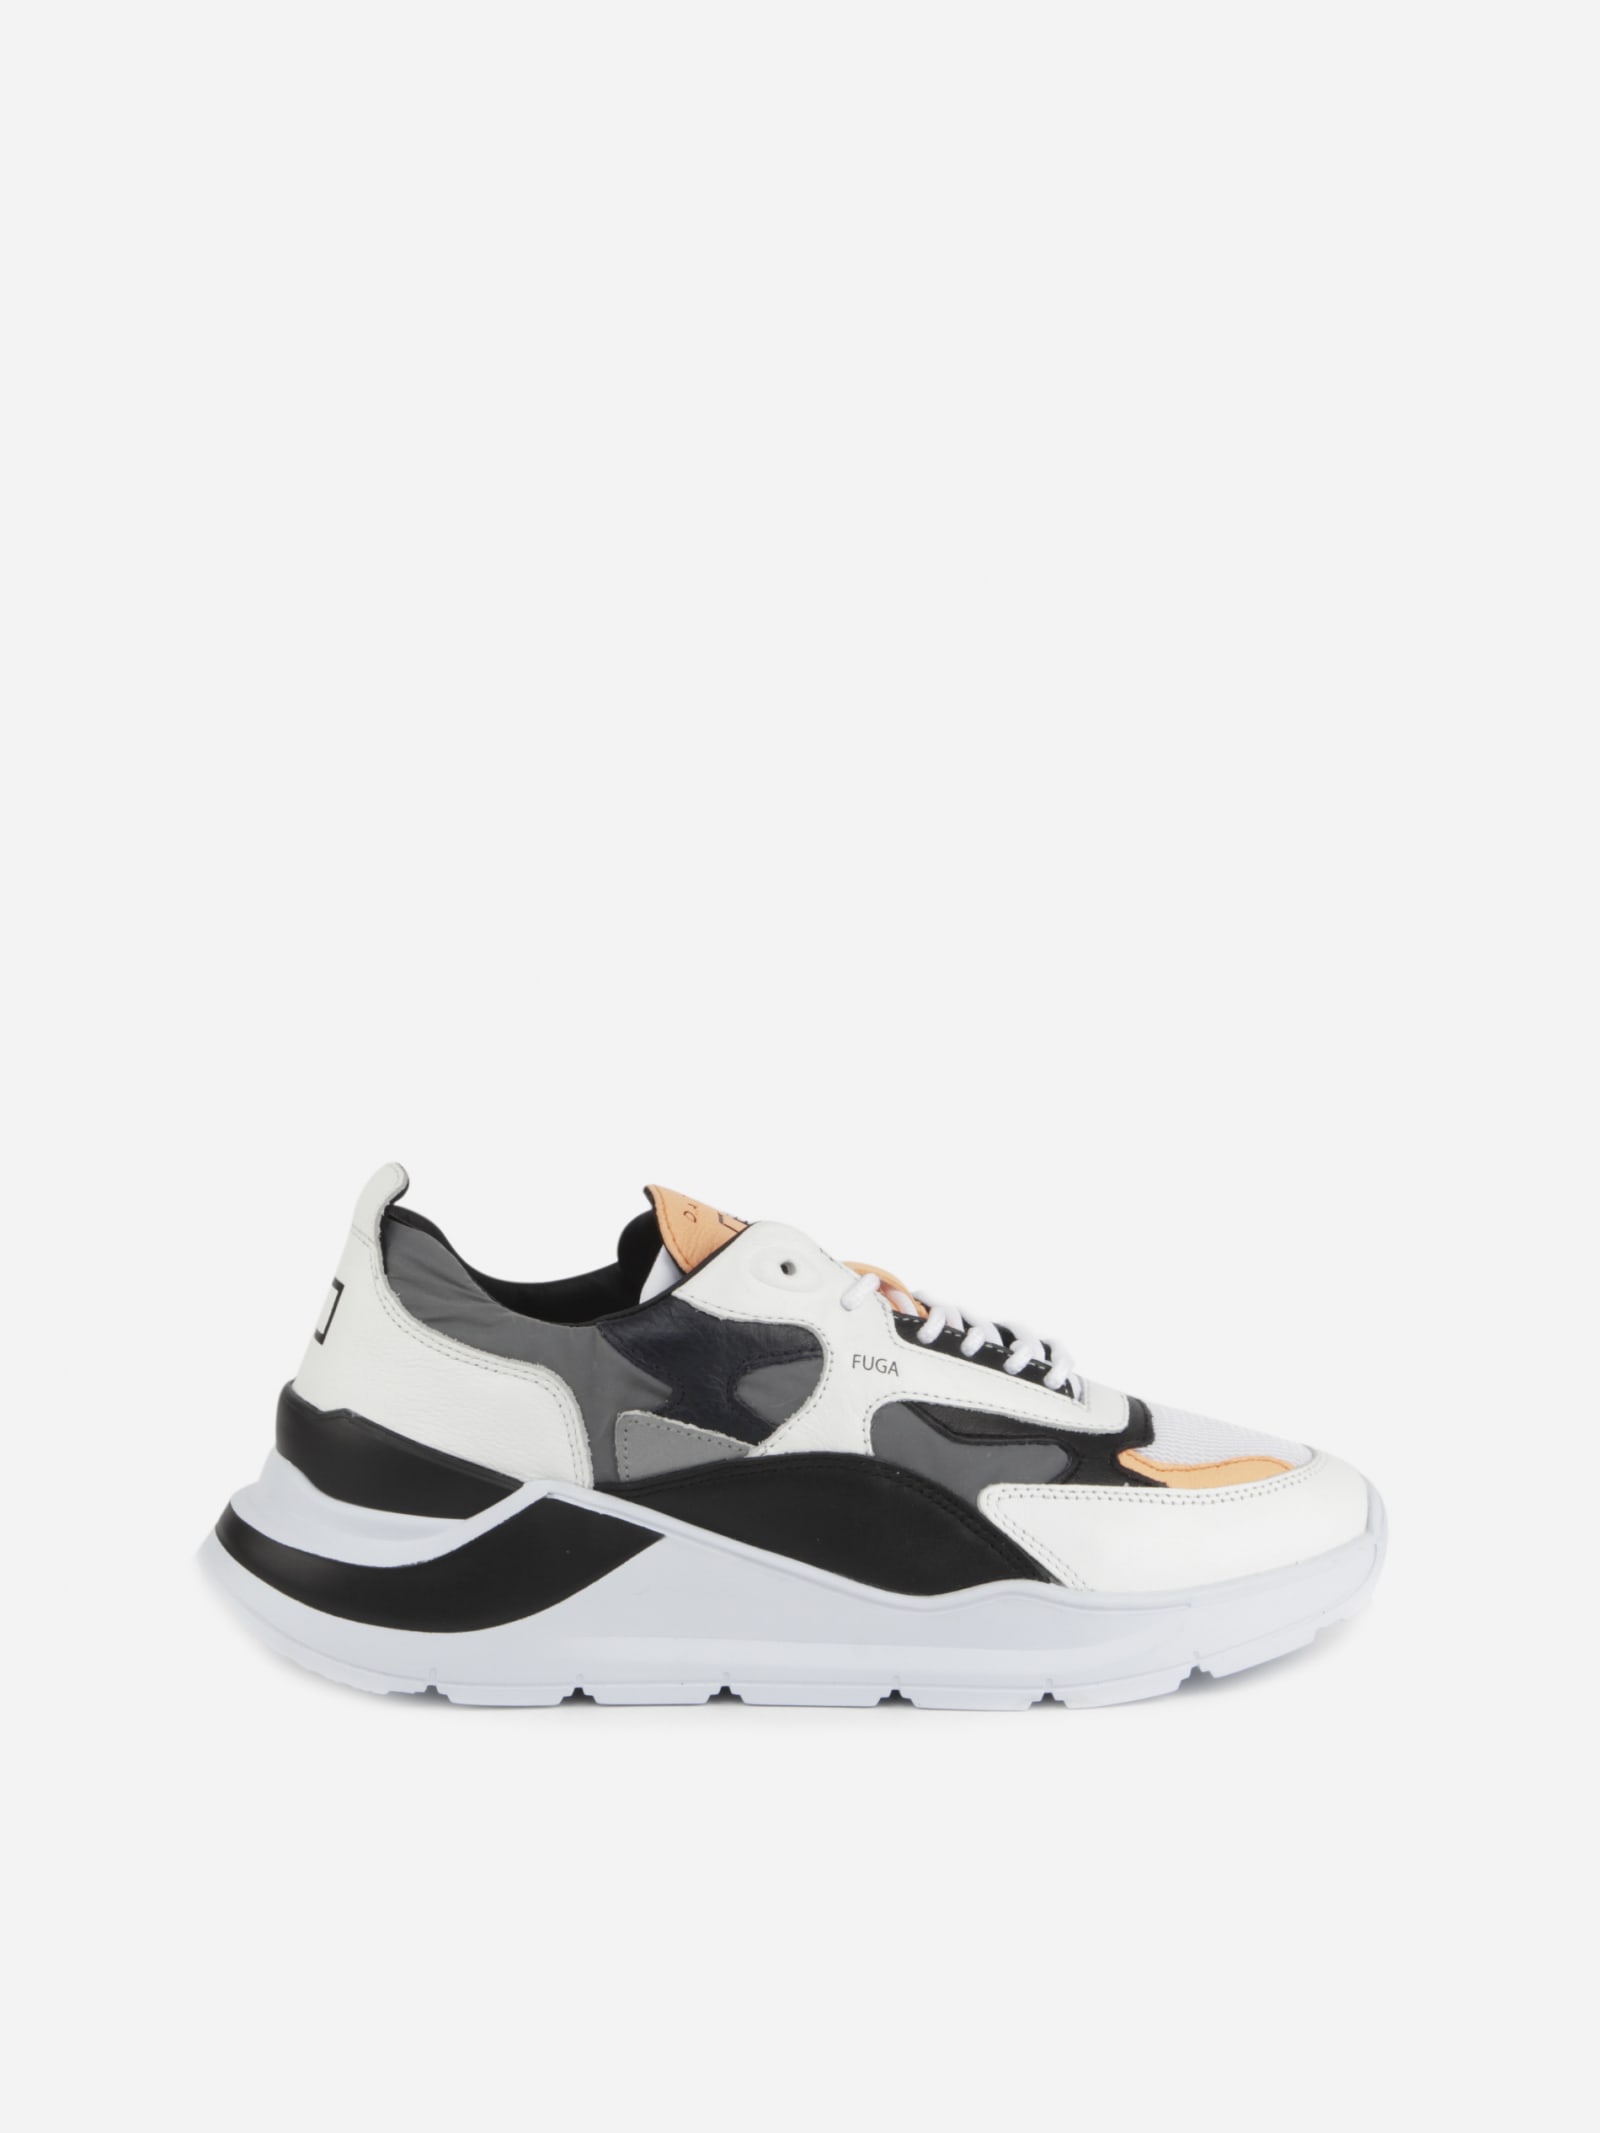 Date Fuga Sneakers In Leather With Nylon Inserts In White, Black, Grey